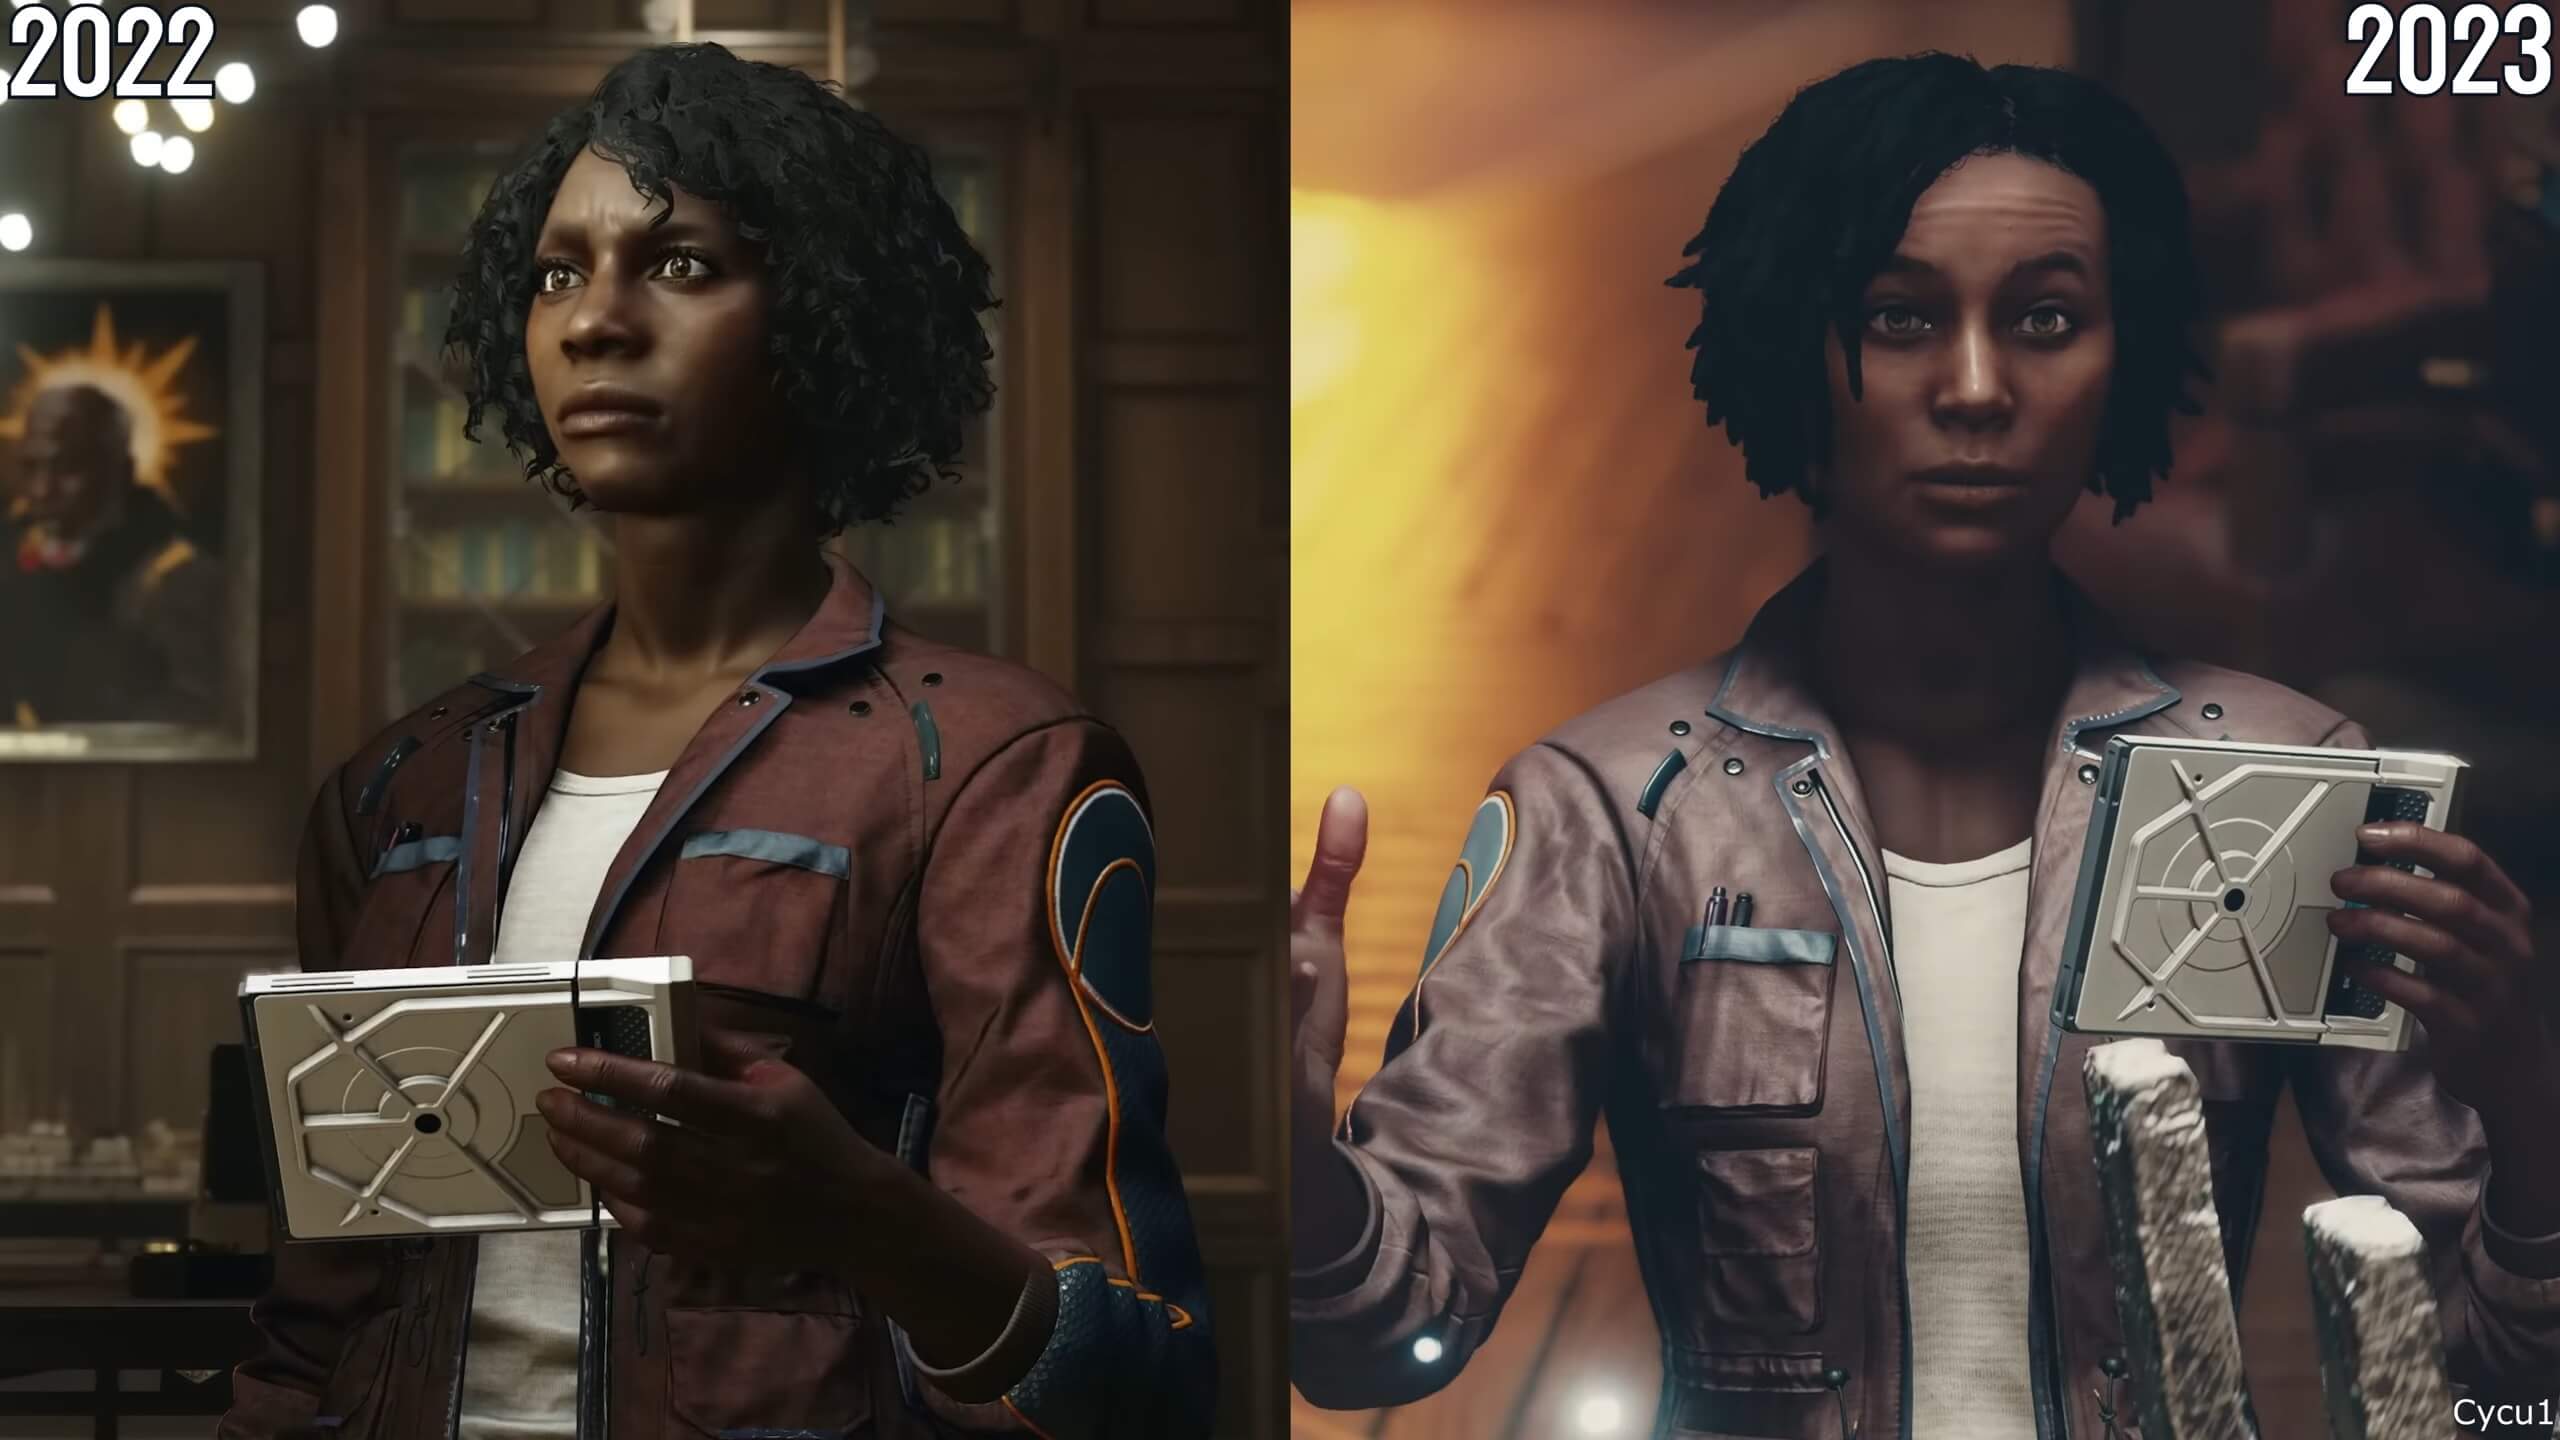 Starfield Comparison Shows Character Model Downgrade Compared to